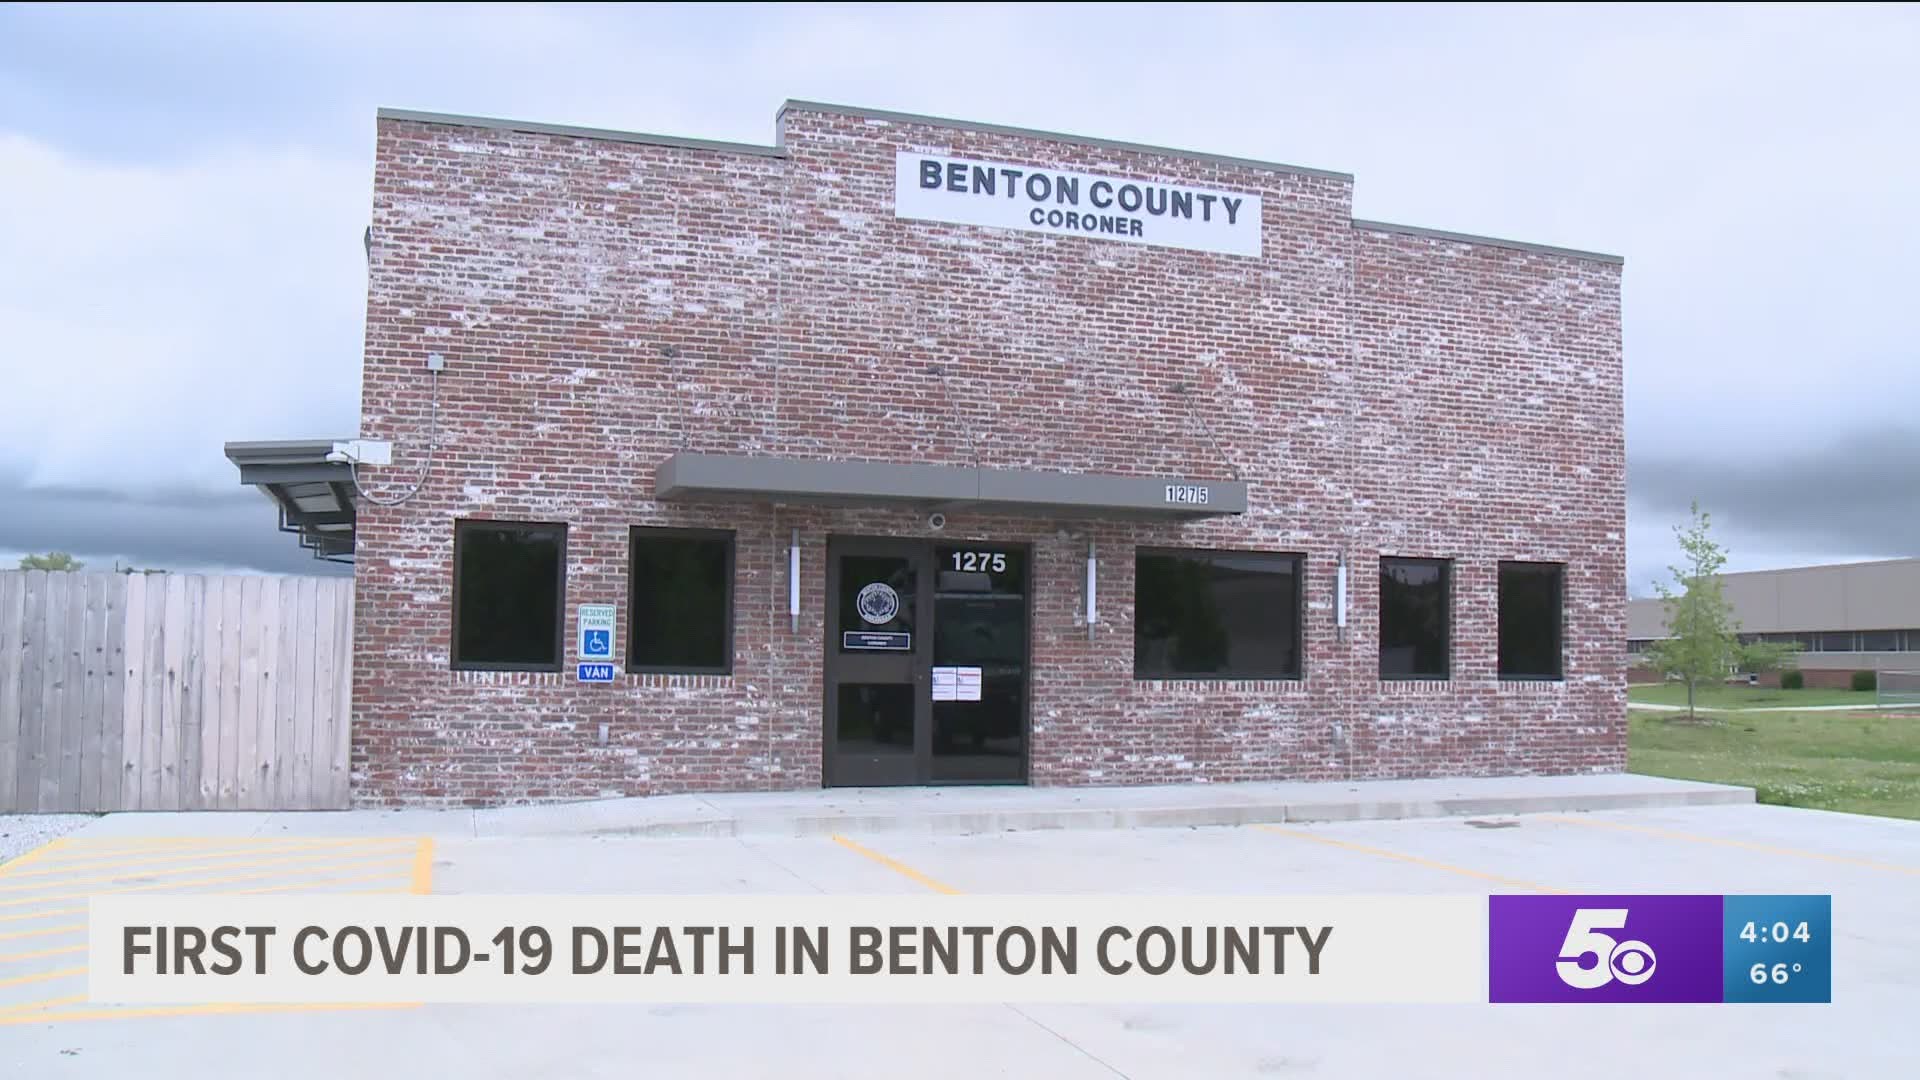 First COVID-19 death in Benton County